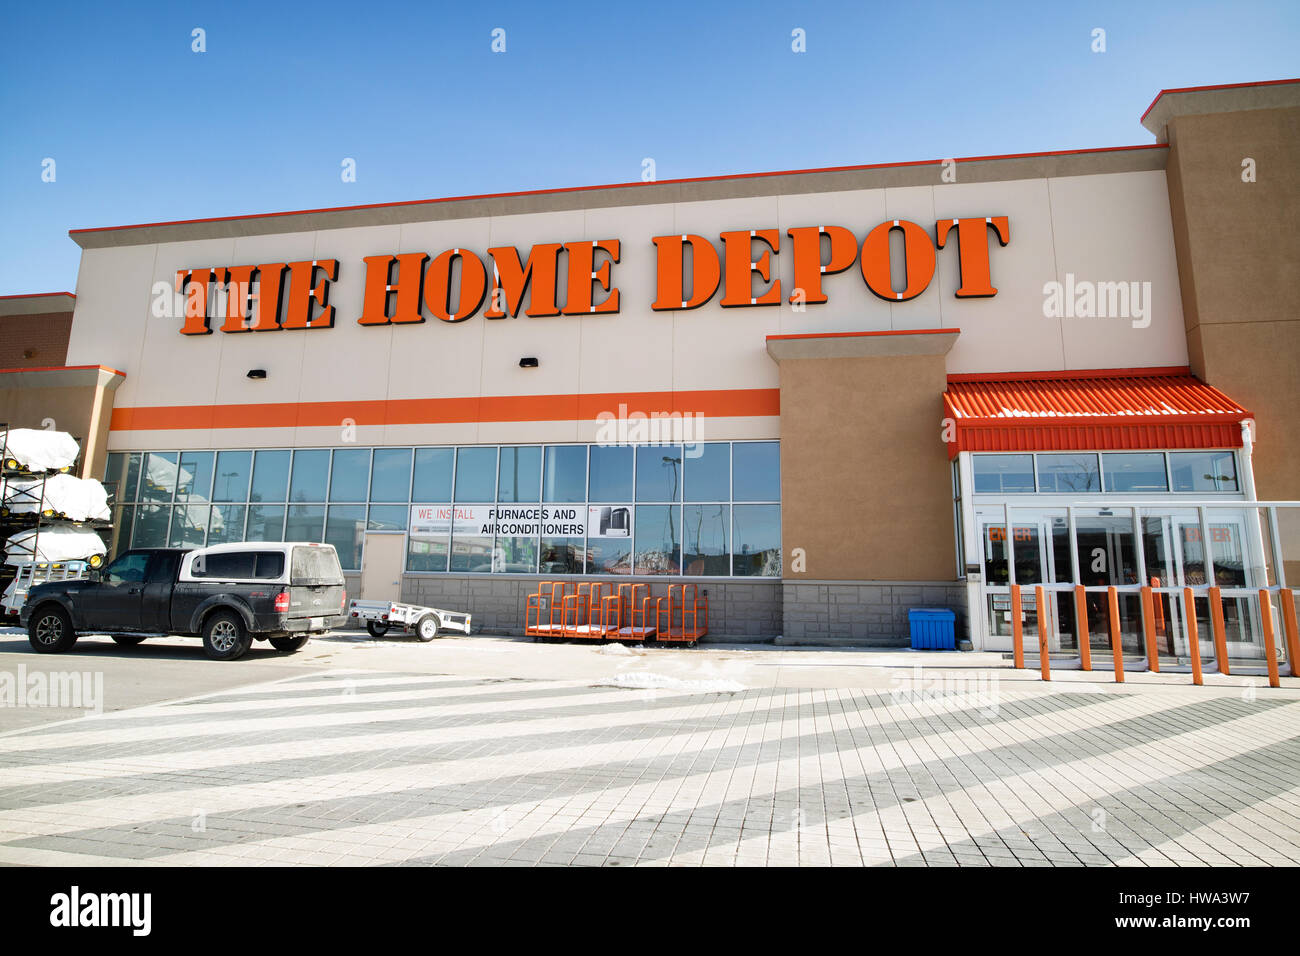 BRAMPTON, CANADA - MARCH 12, 2017: The Home Depot store. The Home Depot is an American retailer of construction products and services, operates many s Stock Photo